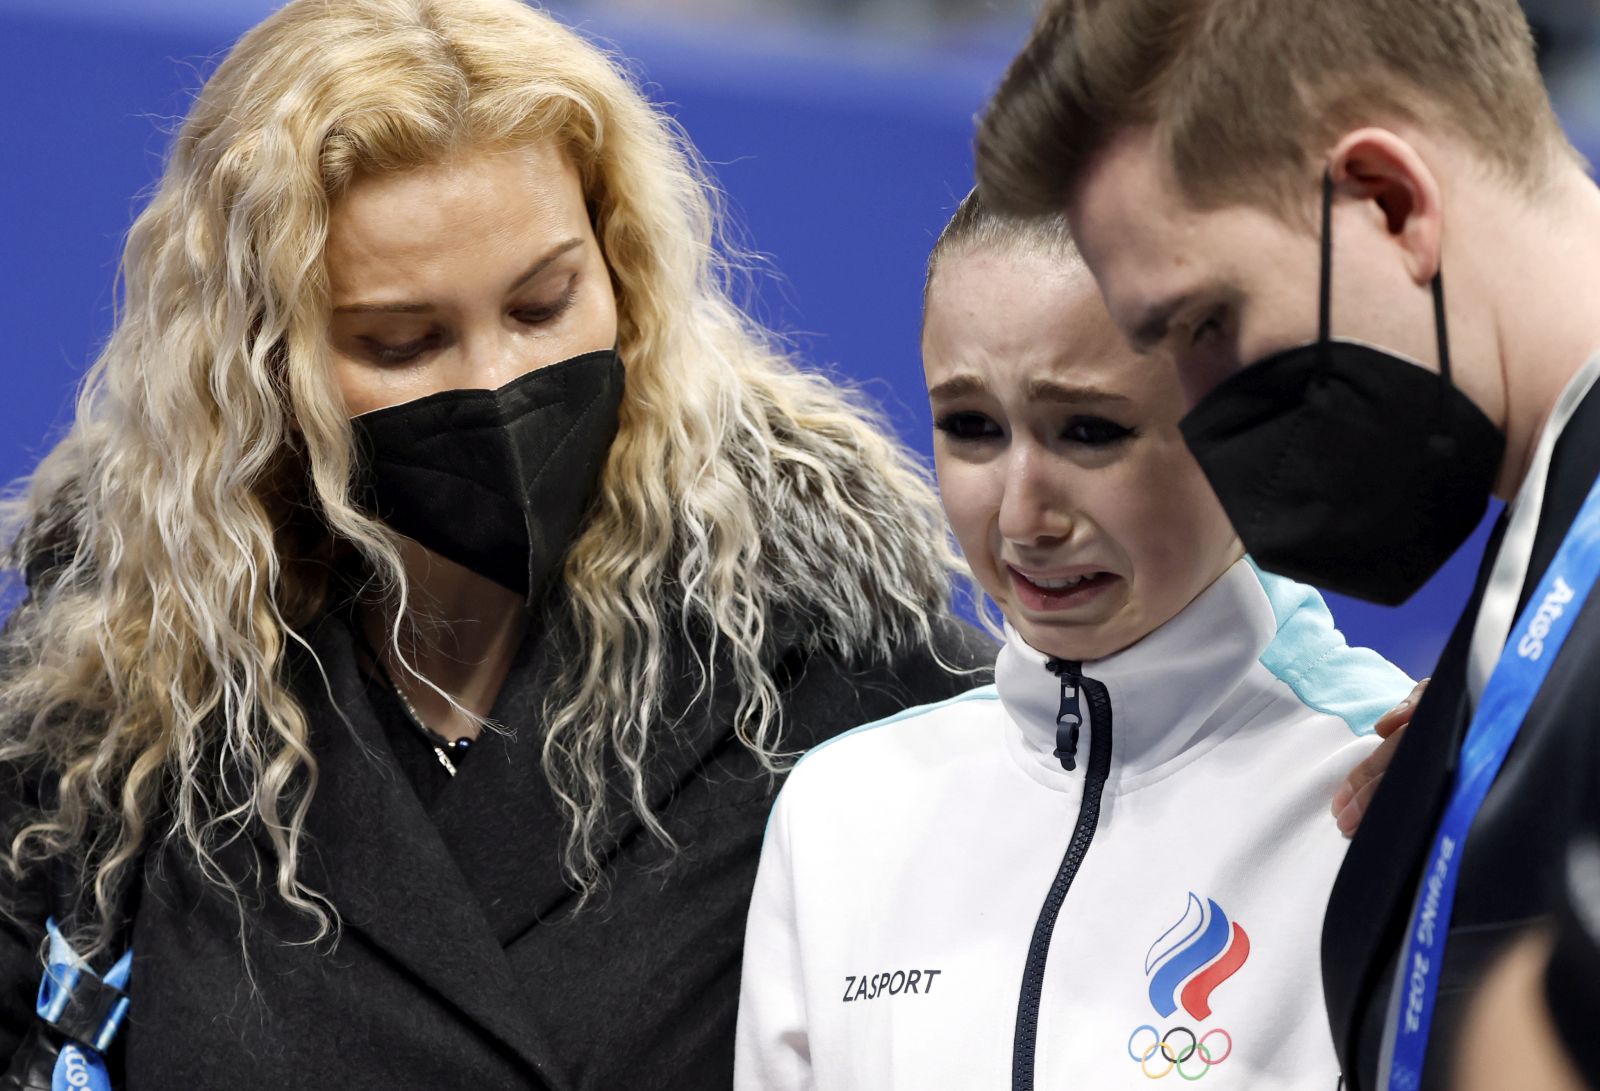 epa09766728 Kamila Valieva (C) of Russian Olympic Committee cries next her coach Eteri Tutberidze (L) after  the Women's Free Skating of the Figure Skating events at the Beijing 2022 Olympic Games, Beijing, China, 17 February 2022.  EPA/HOW HWEE YOUNG